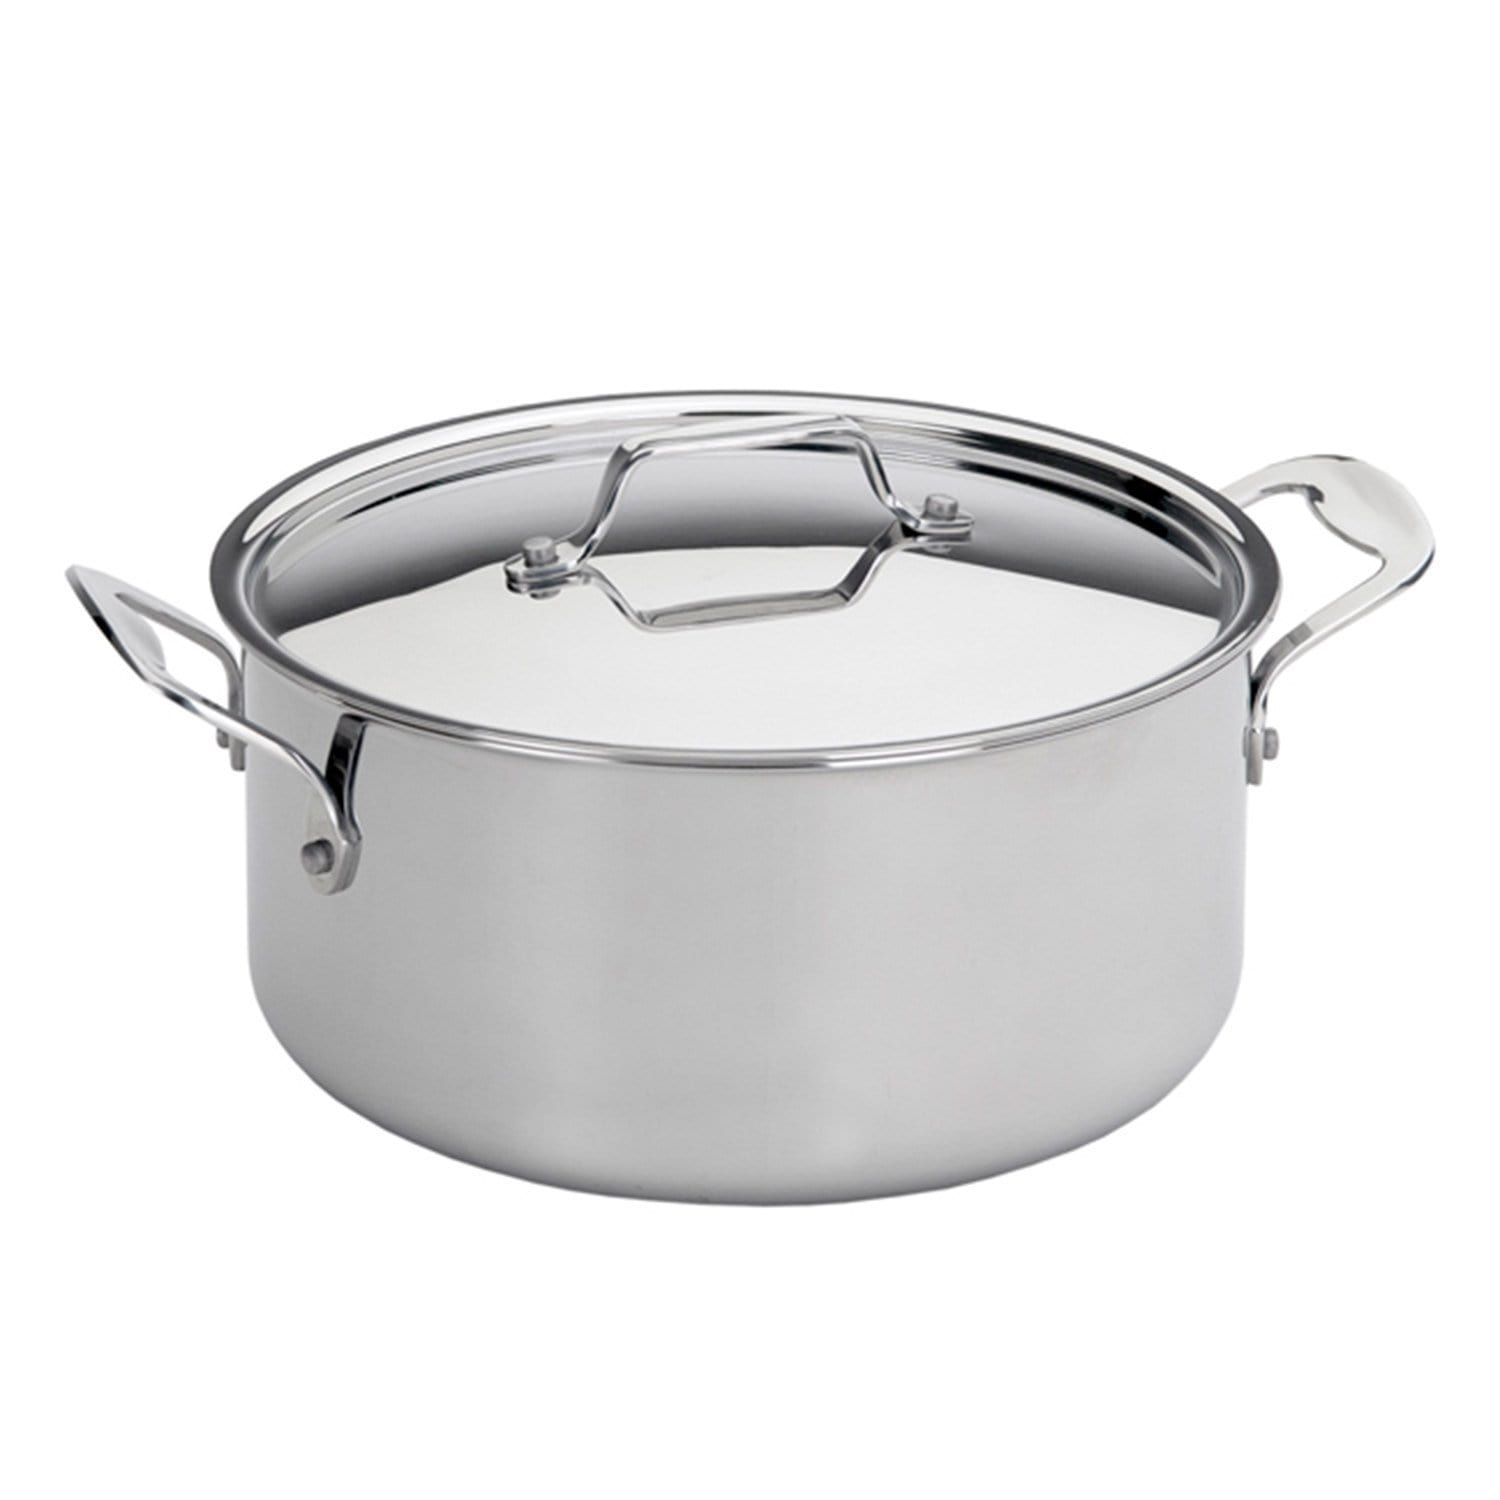 Silampos Supremeprof Casserole with Lid - Silver, 20 cm - 639002BG1020 - Jashanmal Home